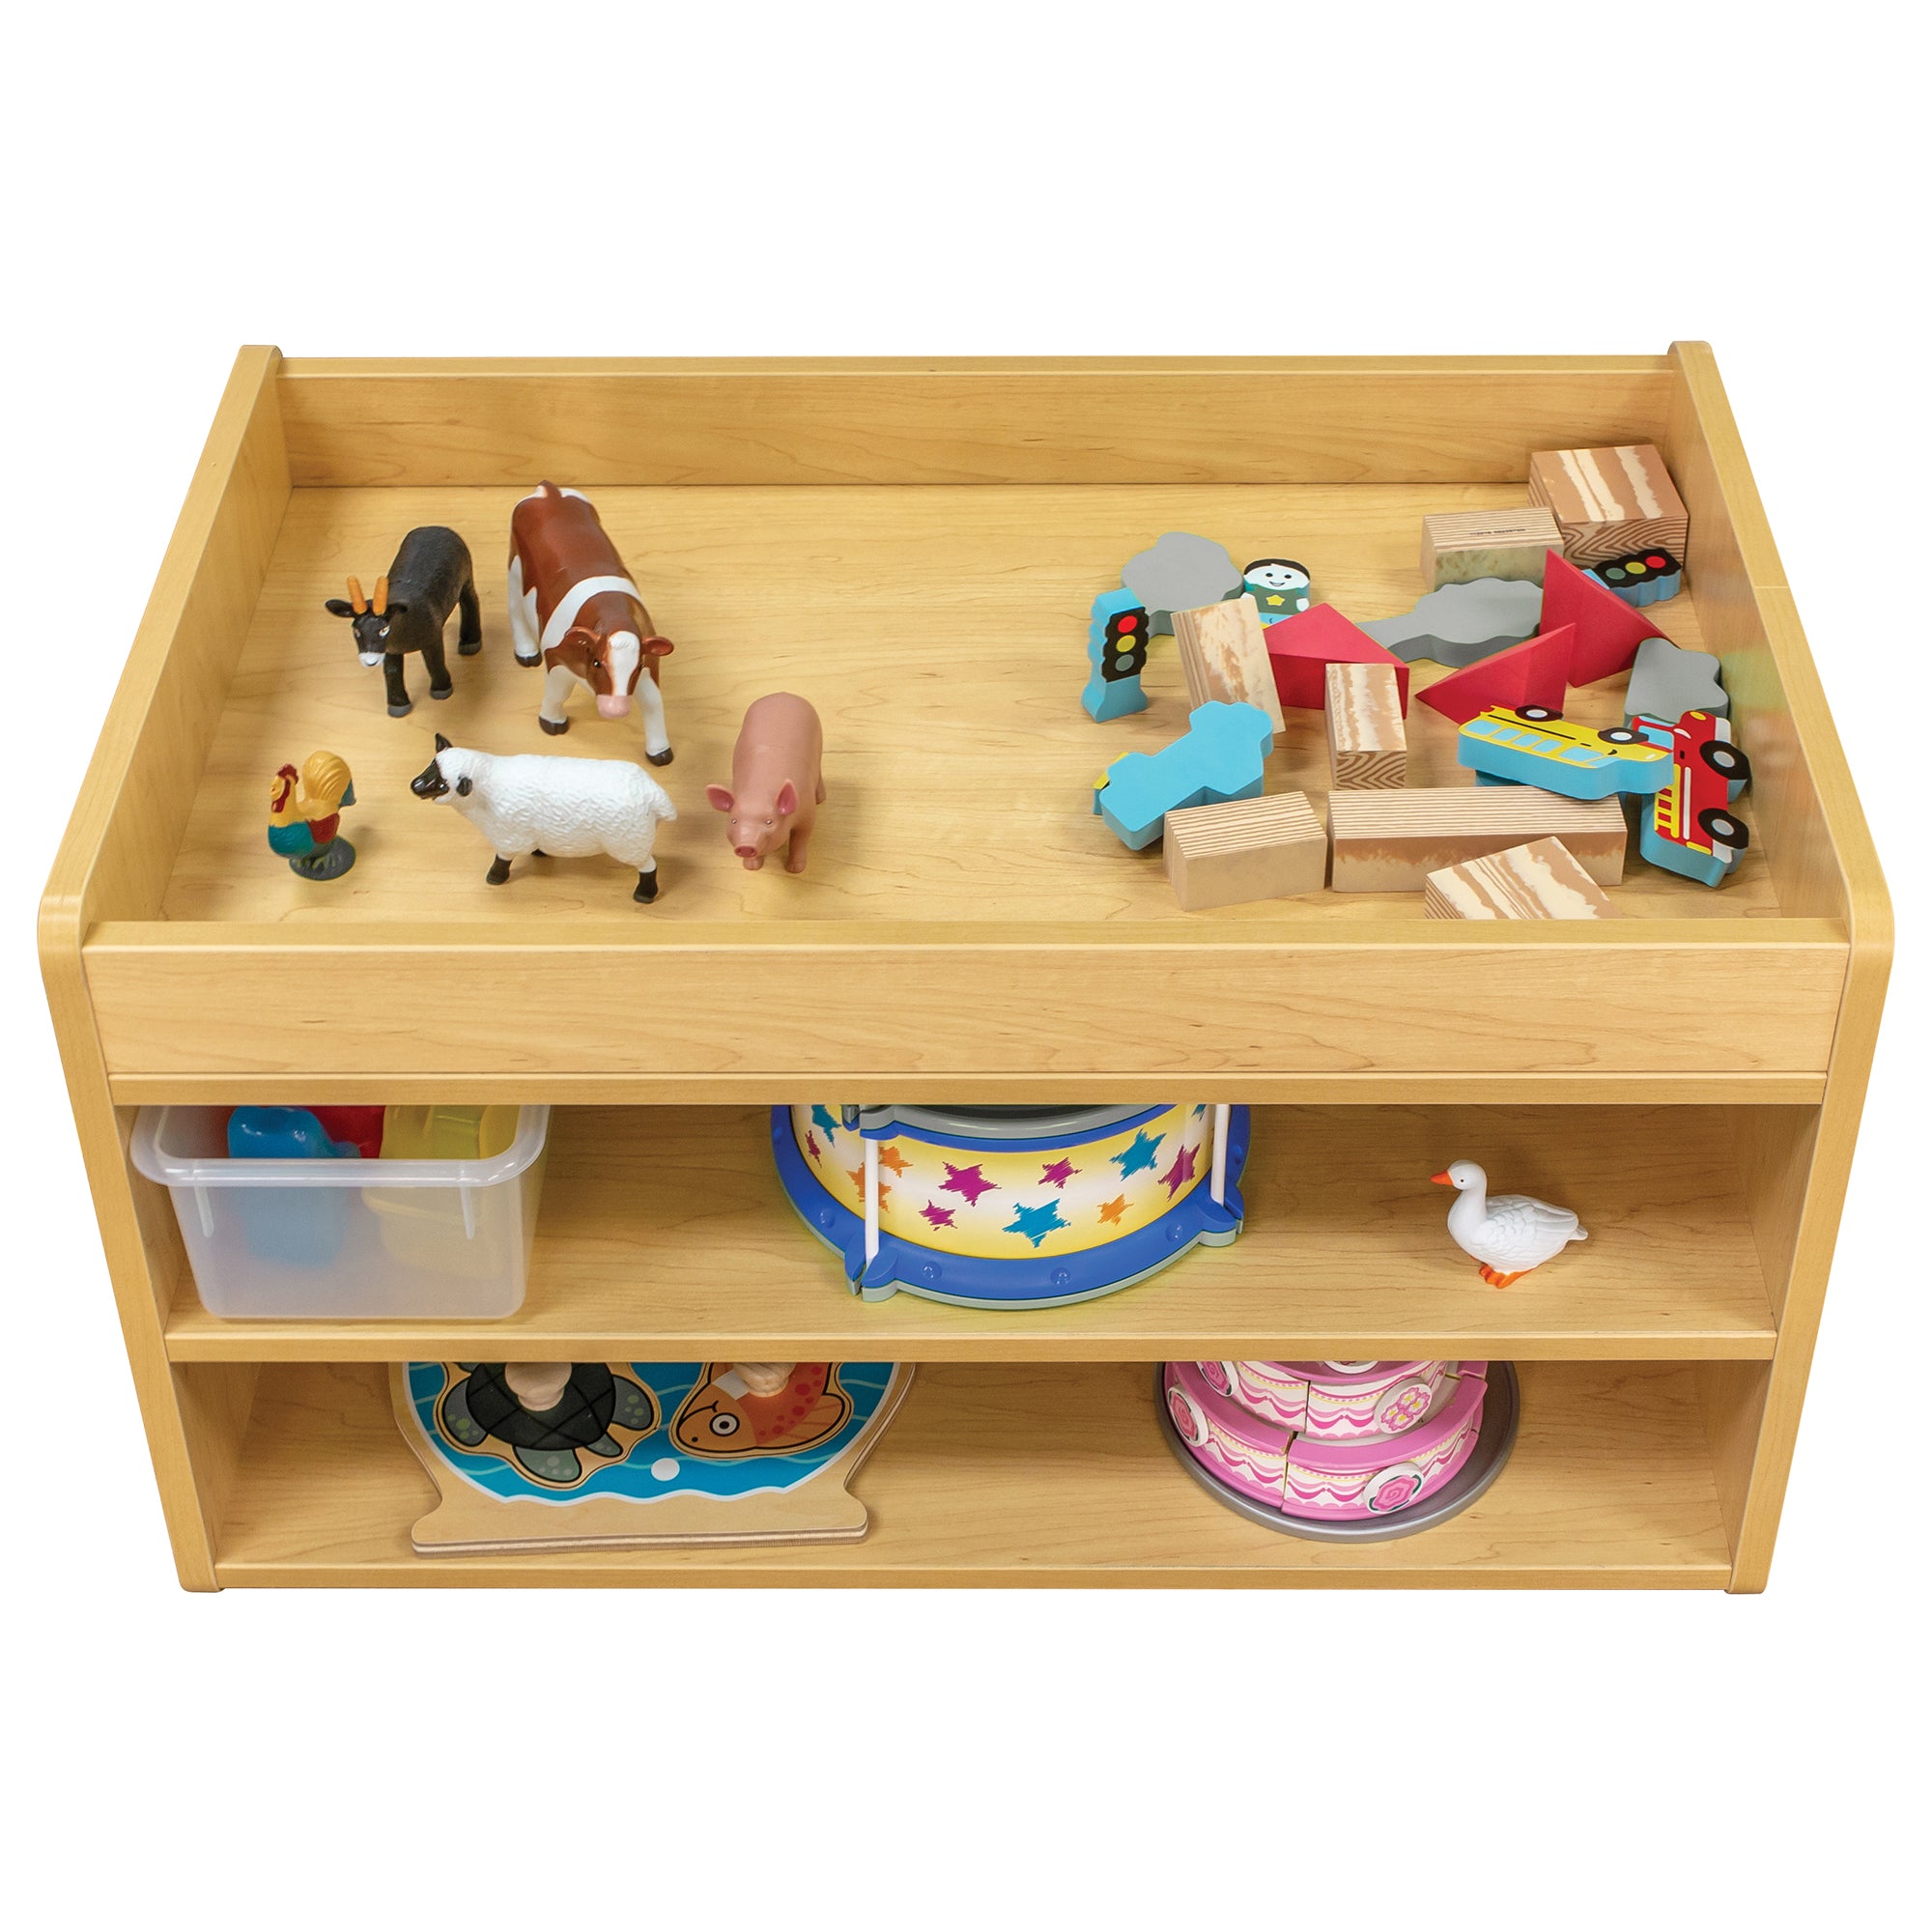 Toddler Play Center 33" Wide